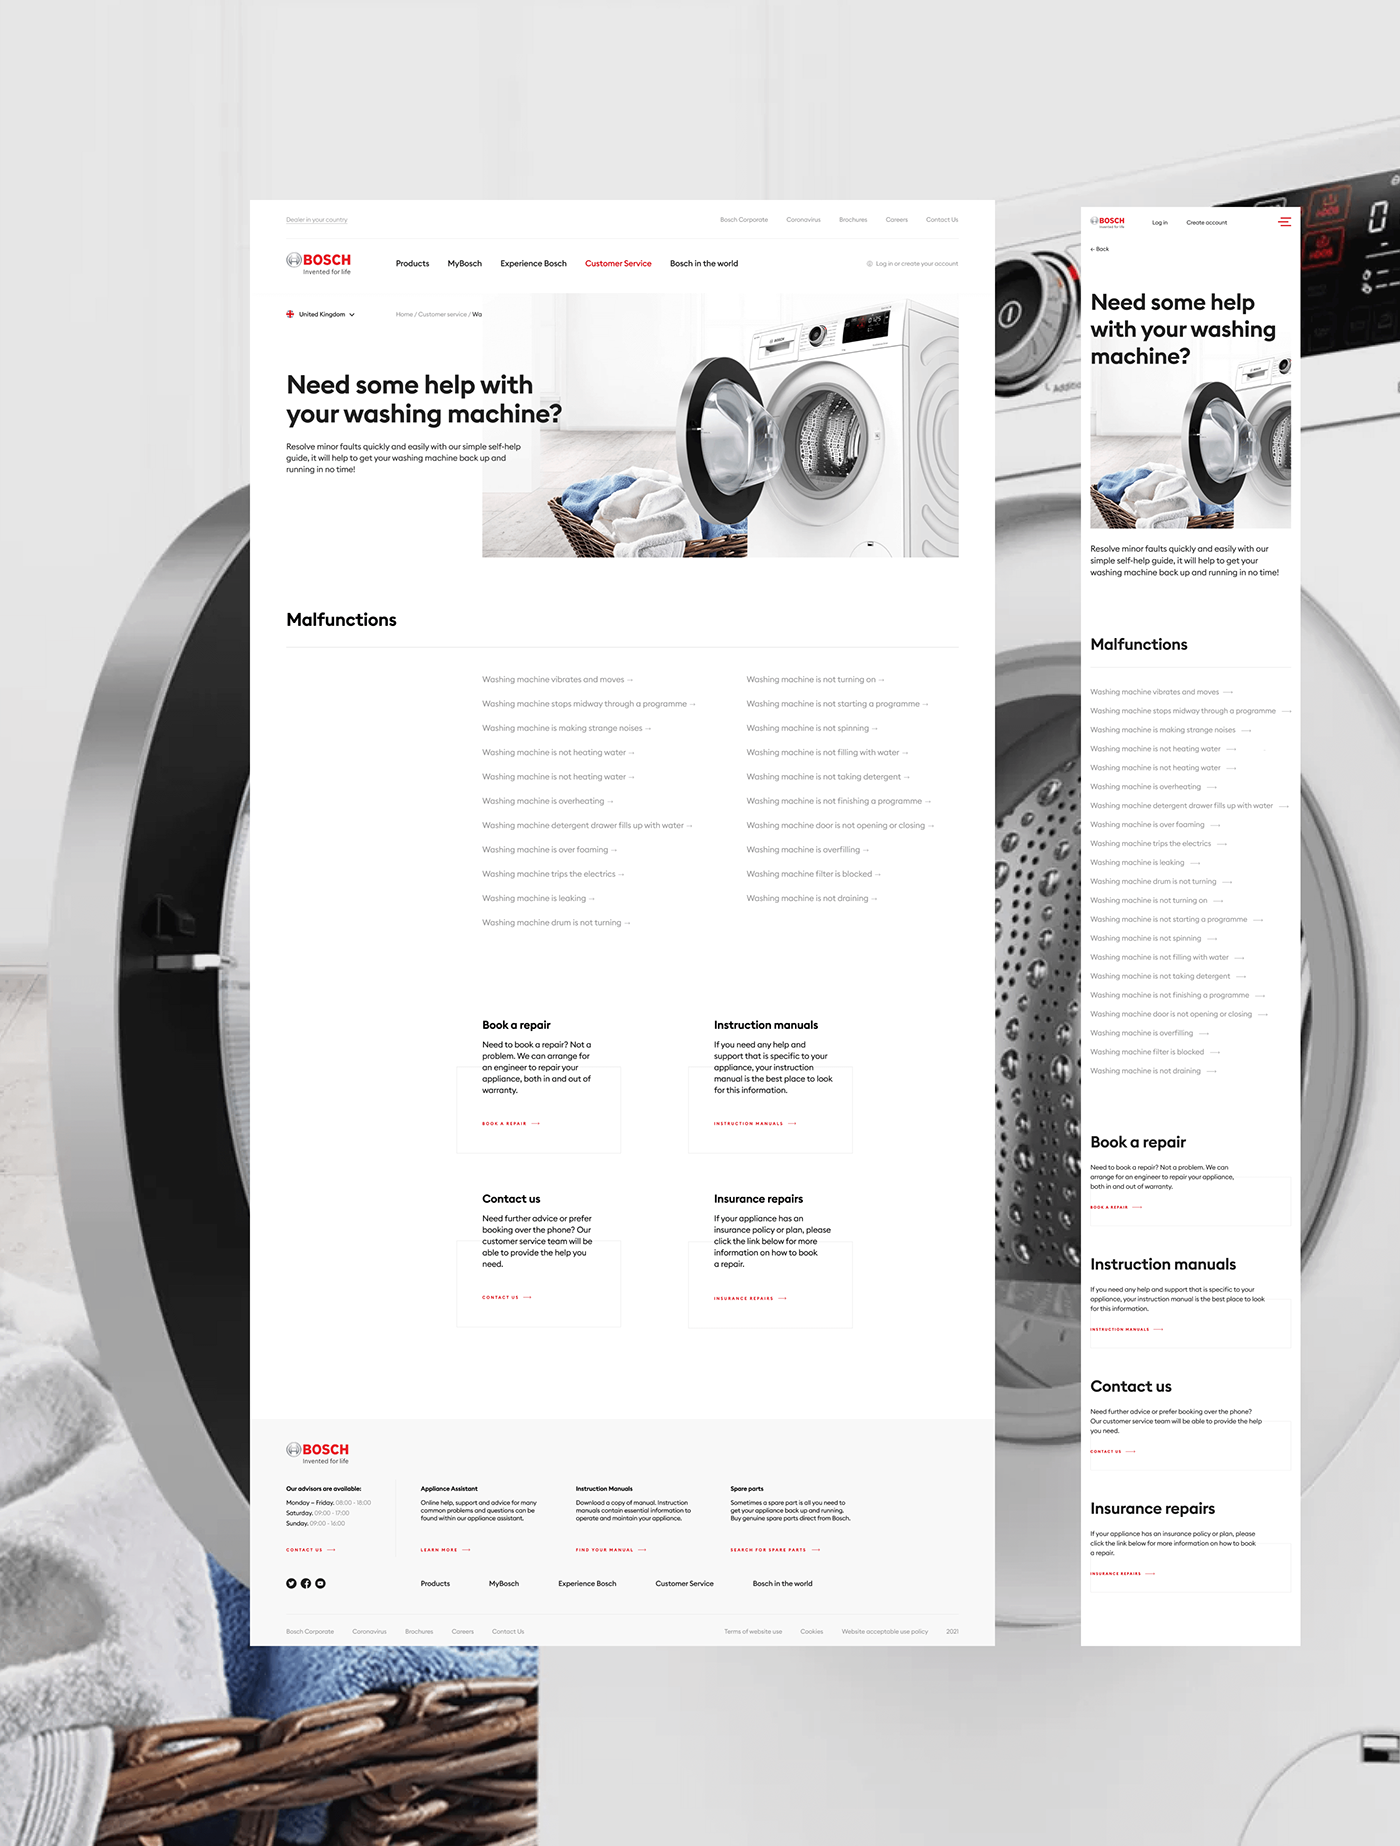 appliances corporate Experience home redesign UI/UX user interface uxdesign Webdesign Website